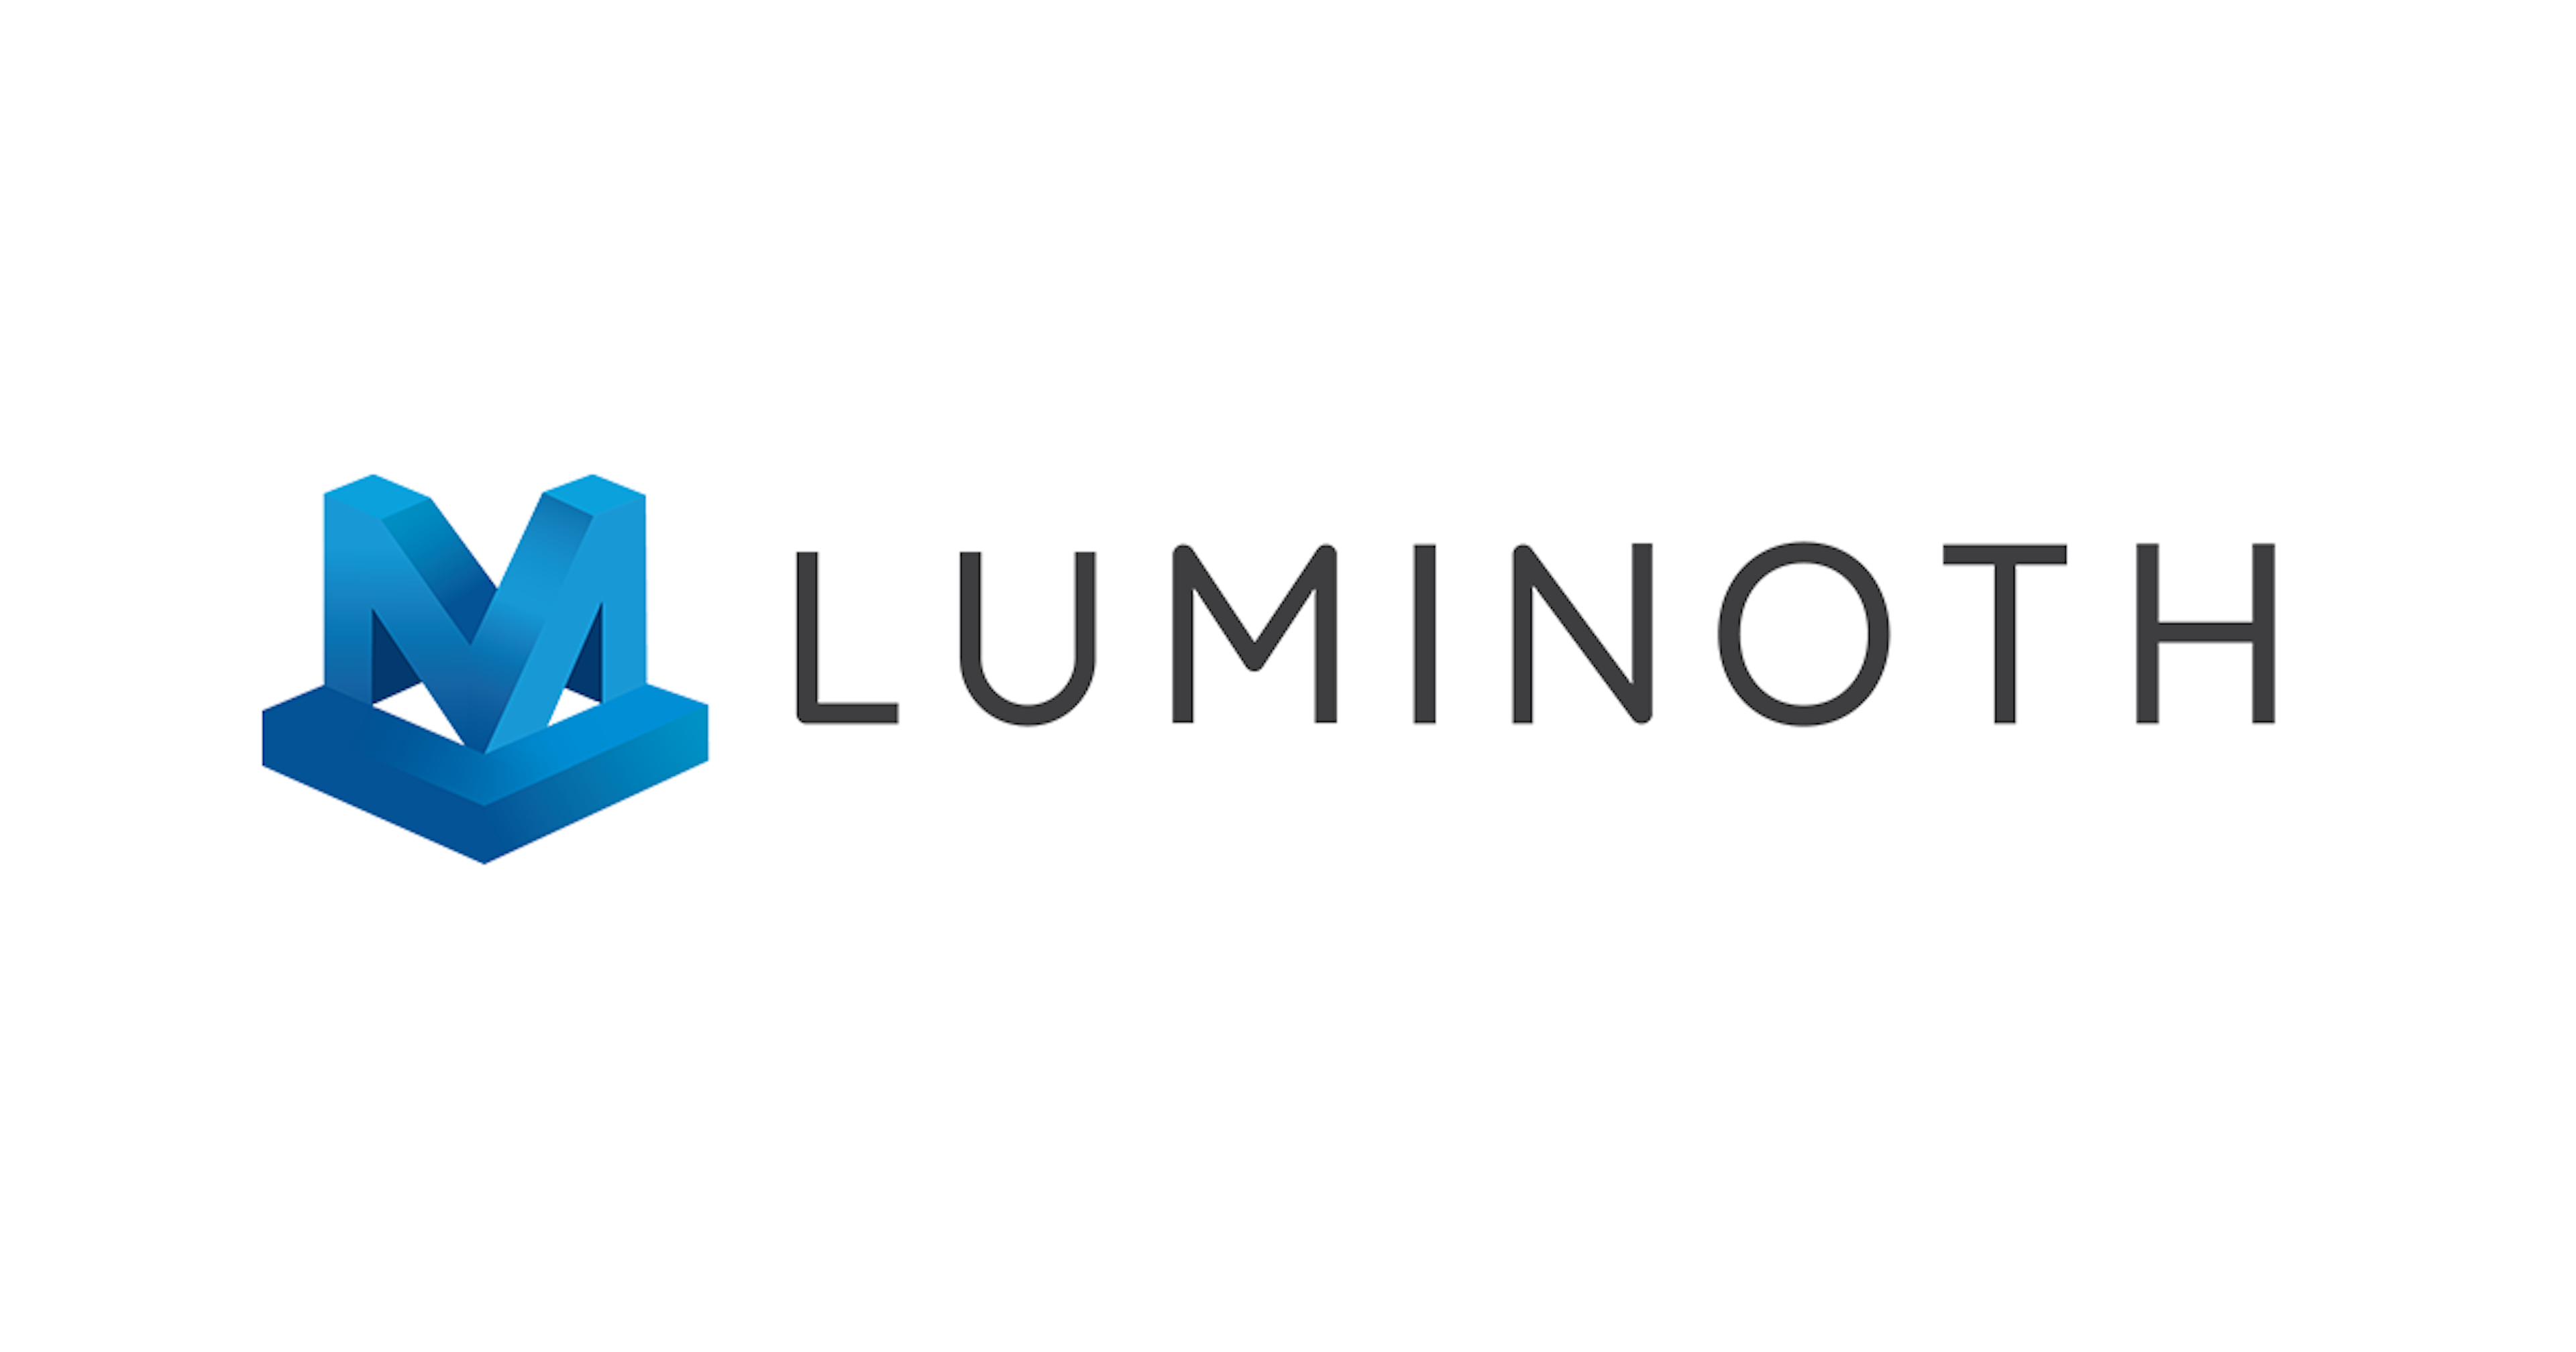 /assets/blog/2017-10-10-launching-luminoth-our-open-source-computer-vision-toolkit/2017-10-10-launching-luminoth-open-source-computer-vision-toolkit-06318d7072.png